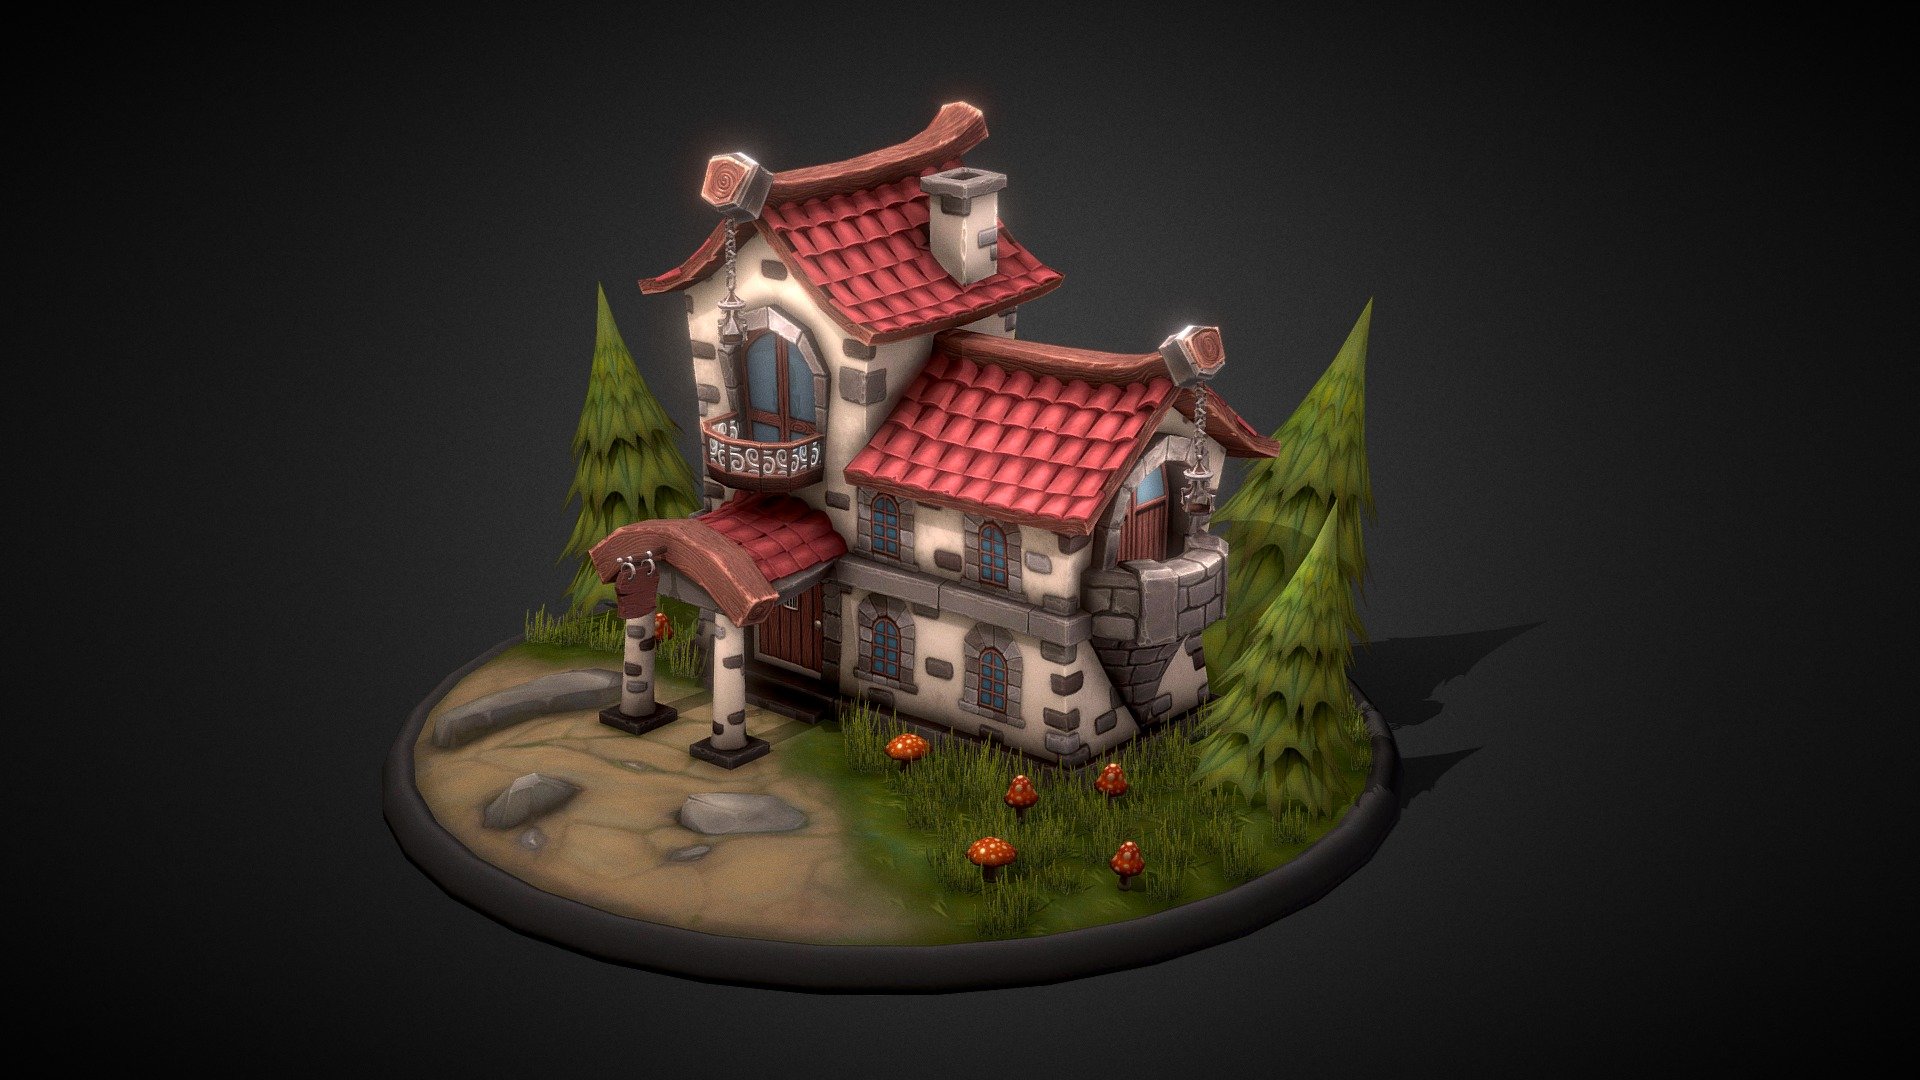 This is a model completely done in Blender &amp; Substance painter. Step by step I'm getting closer to the stylized hand painted style. And I enjoy it so much. I did not put much effor on the envornment cause I just didn't want to upload a lonely house, but still wanted to upload it soon. Hope you like it. 

You can also check it out on:

IG - https://www.instagram.com/p/CKyhFvBDRe3/
TW - https://twitter.com/Pavlez360/status/1356671840853311489 - Greenwood Forest Tabern - Stylized Architecture - Buy Royalty Free 3D model by P3D (@PelpesElSabio) 3d model